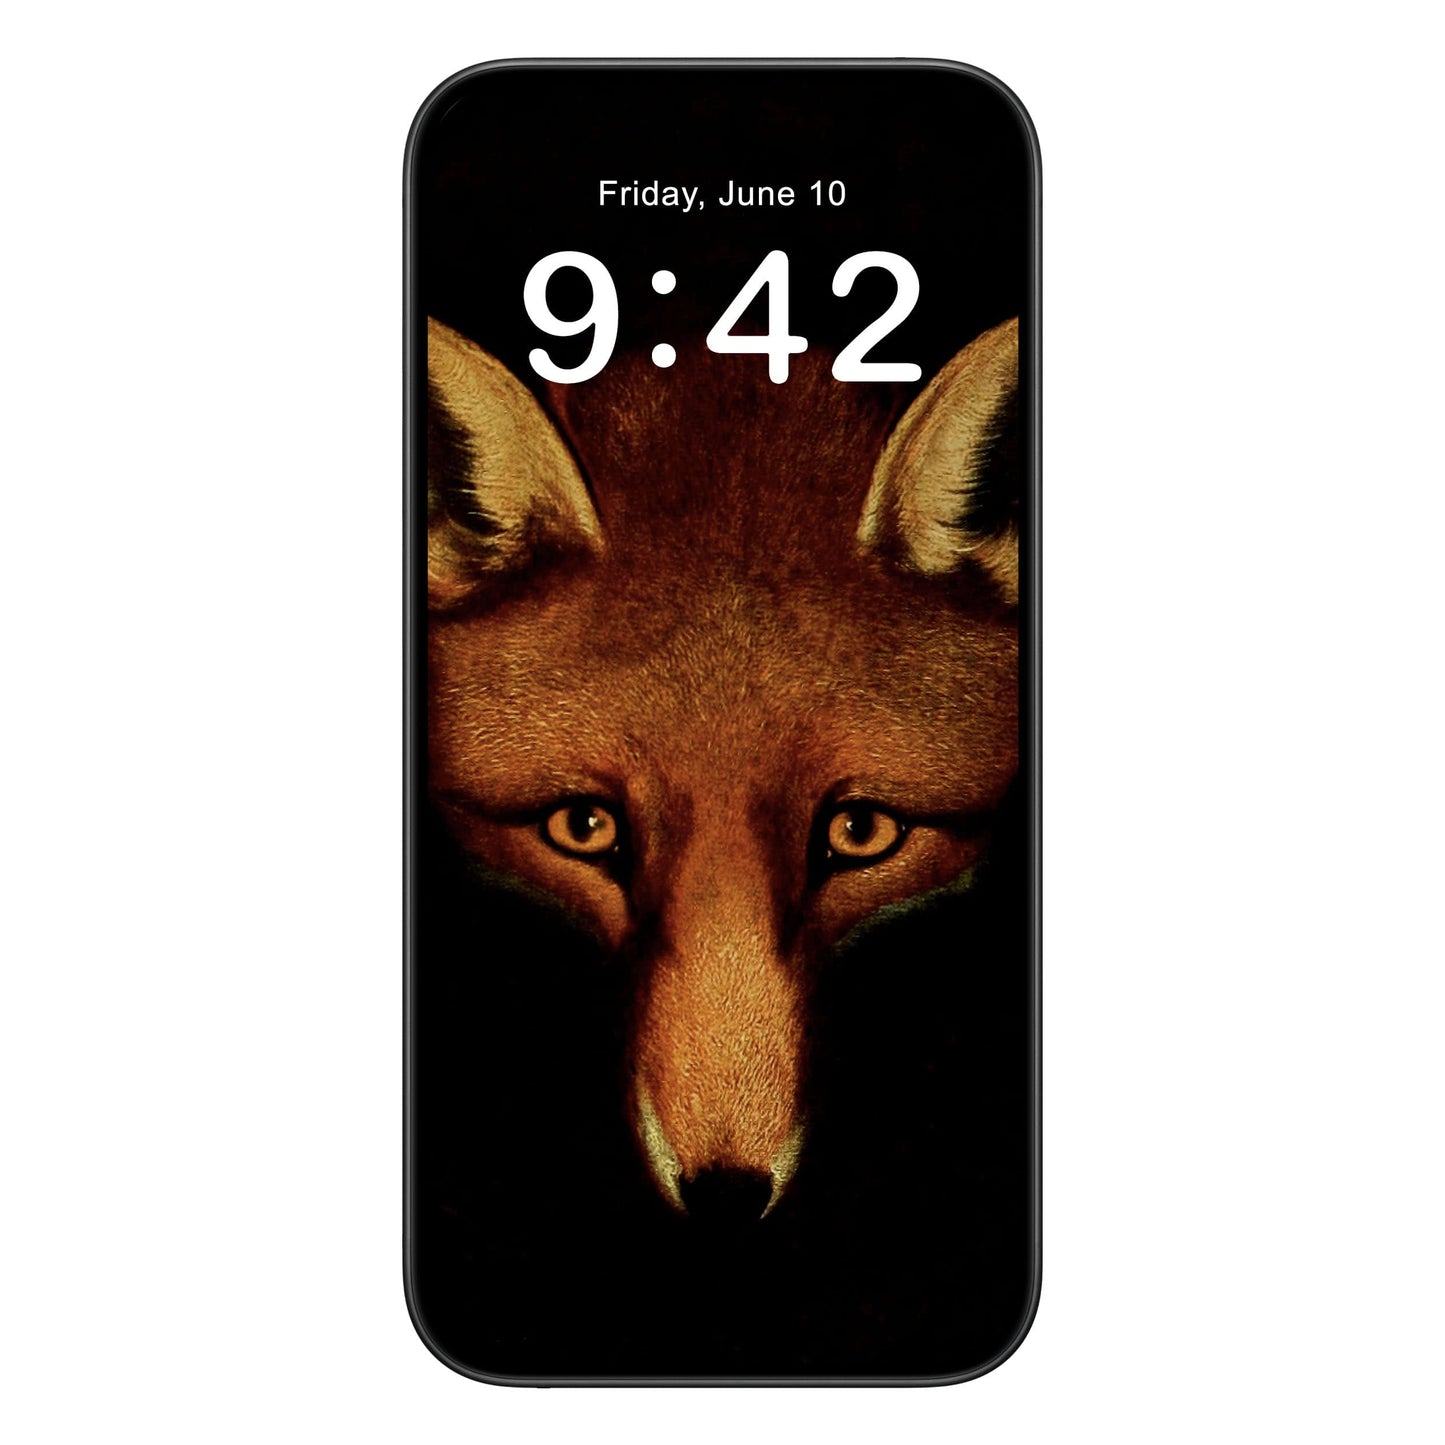 Red Fox phone wallpaper background with reynard the fox design shown on a phone lock screen, instant download available.